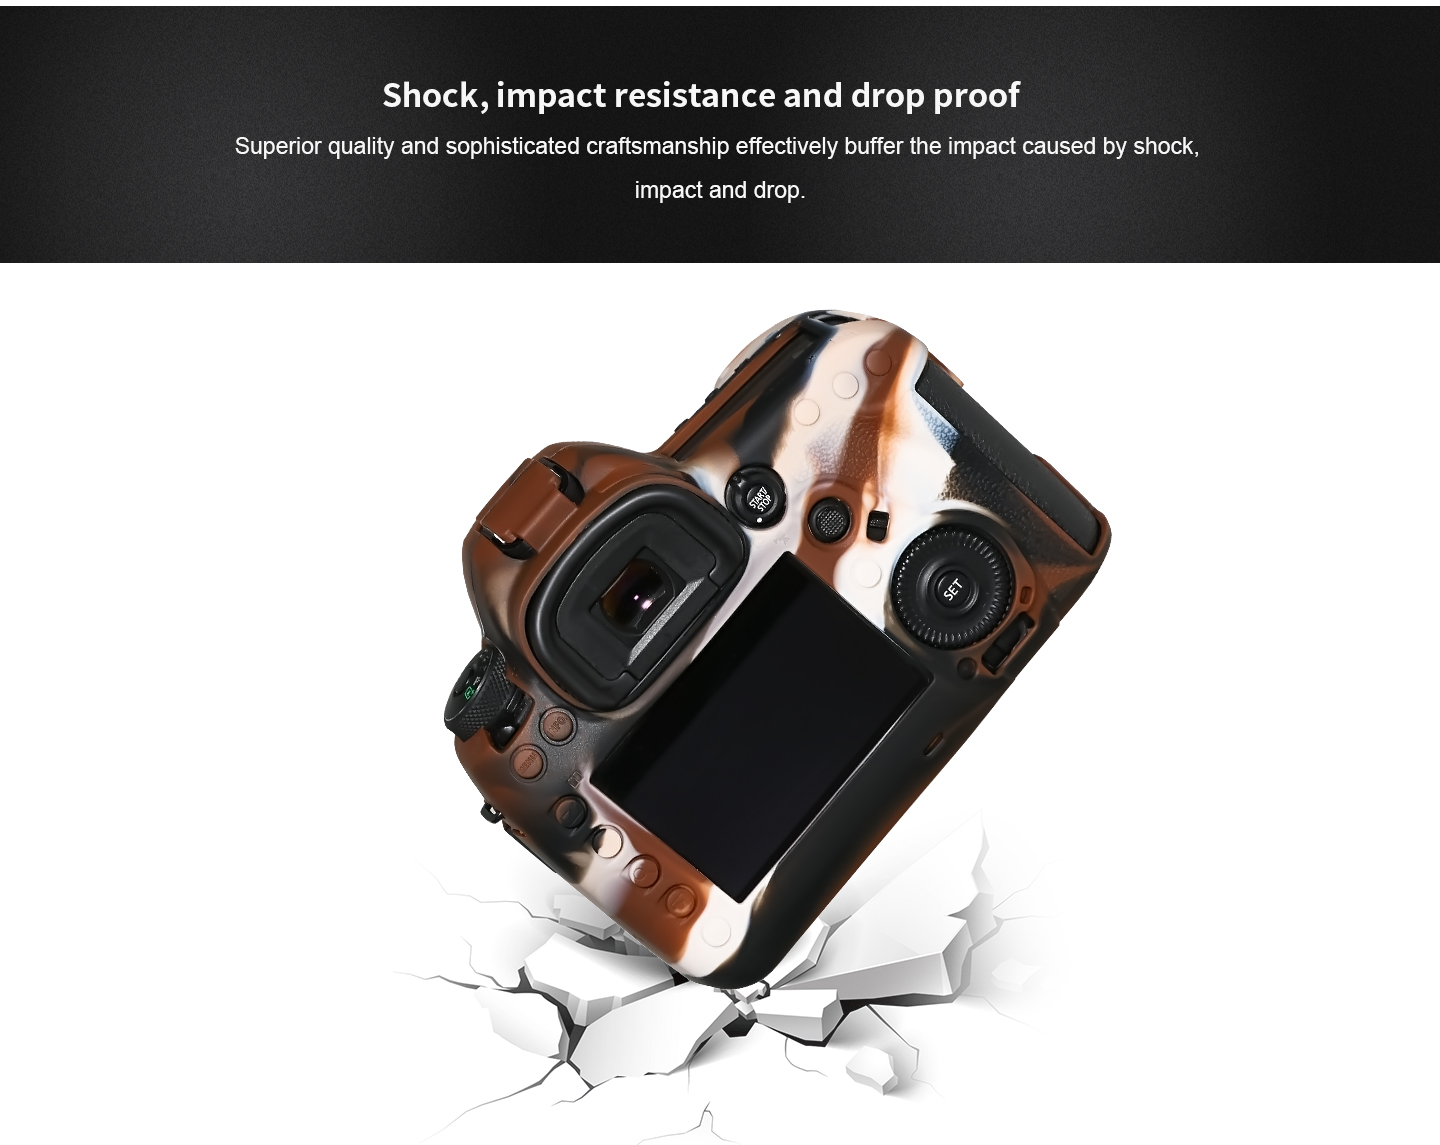 Shock, impact resistance and drop proof